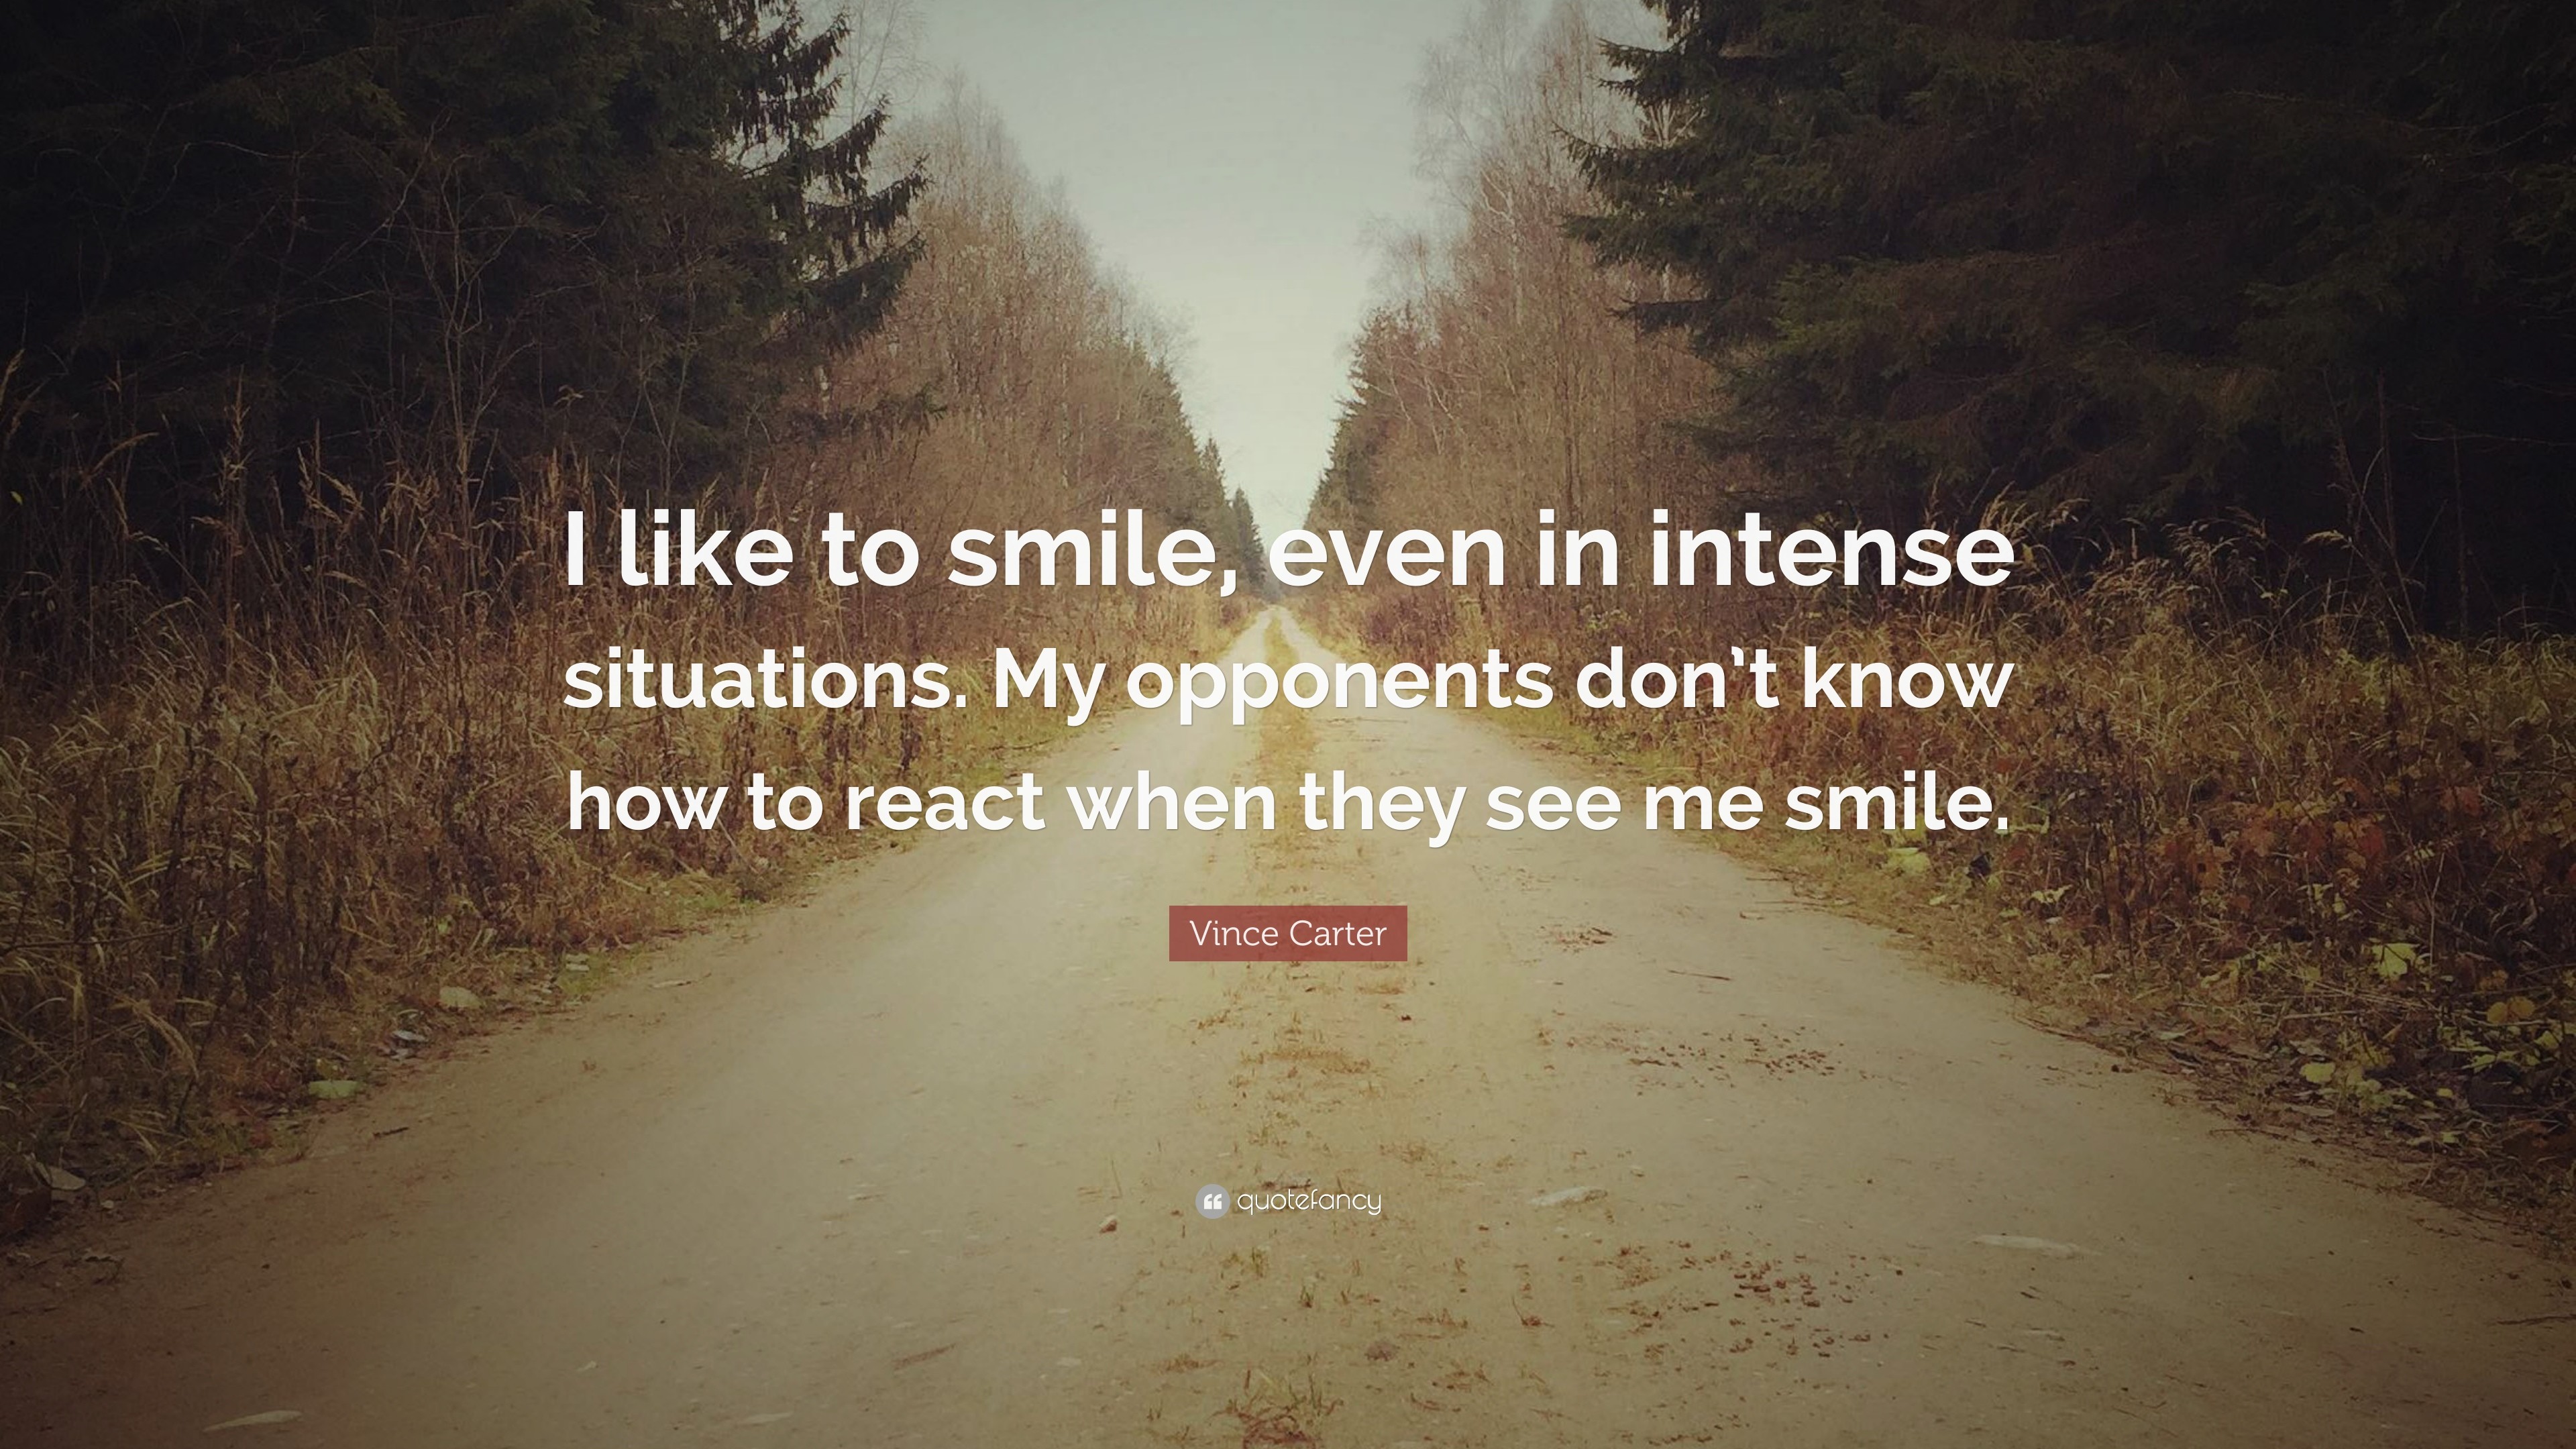 3840x2160 Vince Carter Quote: “I like to smile, even in intense situations. My